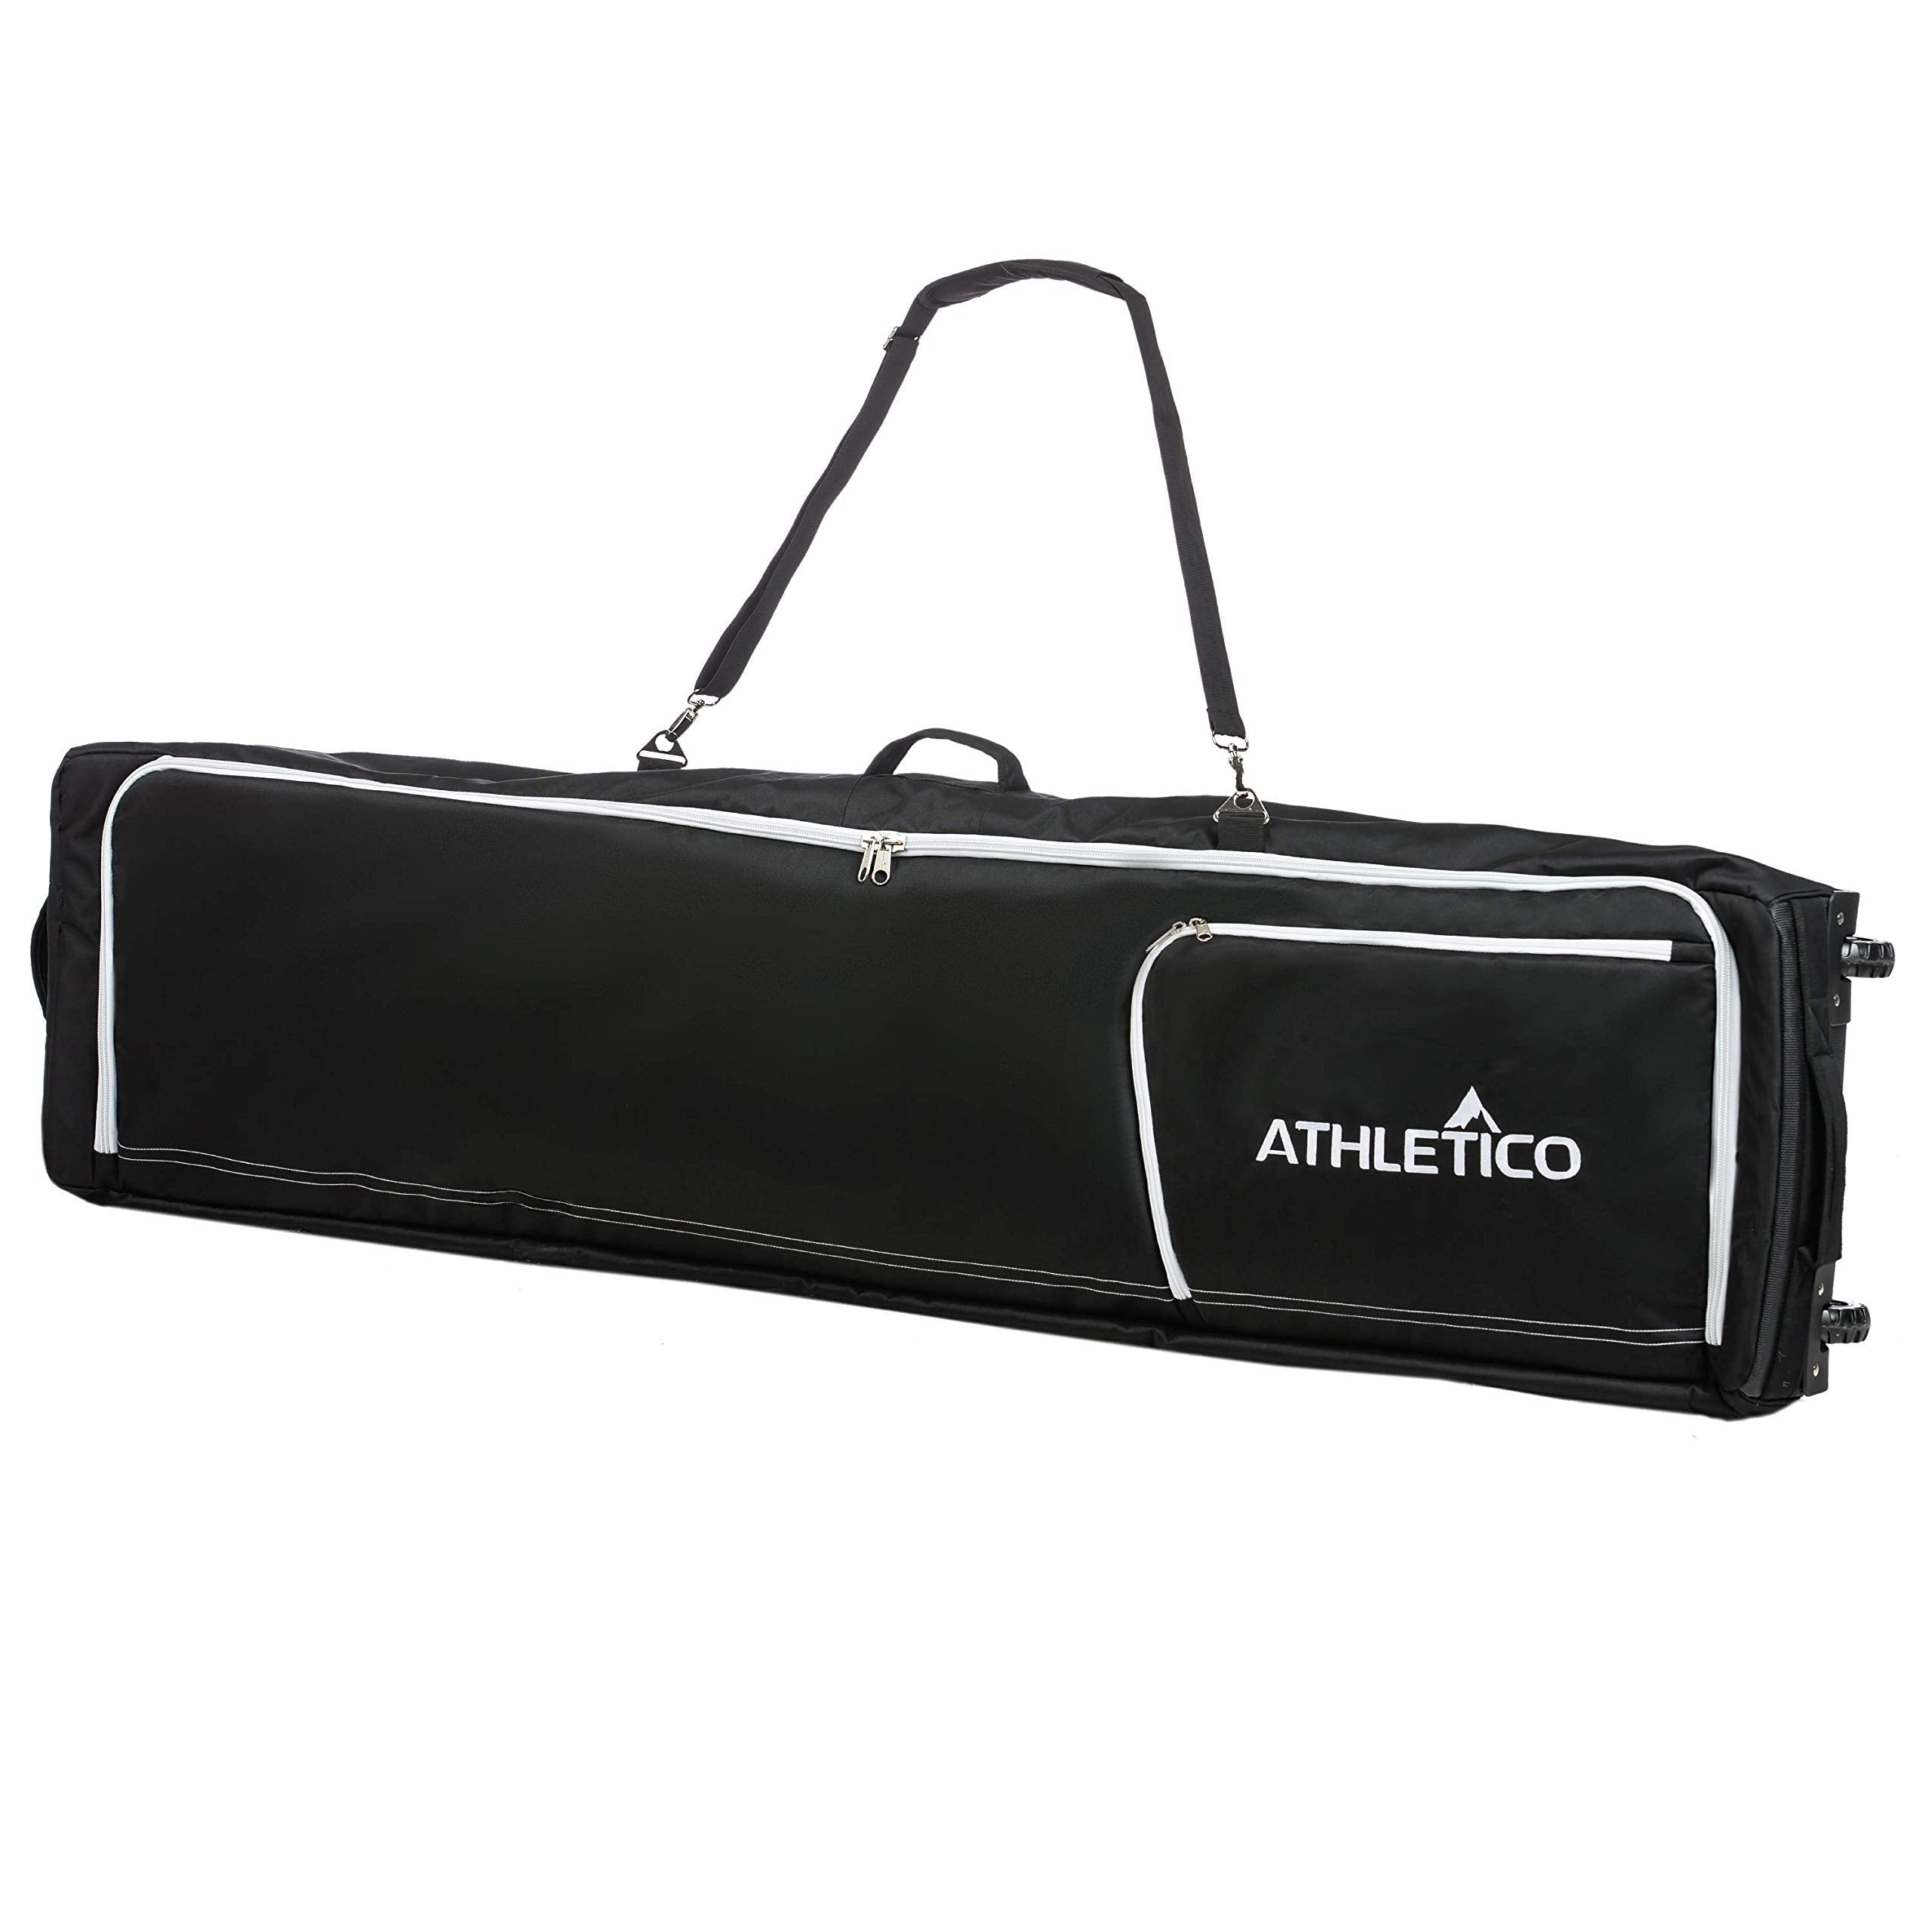 Athletico Conquest Padded Snowboard Bag With Wheels - Travel Bag for Single Snowboard and Snowboard Boots (Black, 175 cm)  - Like New